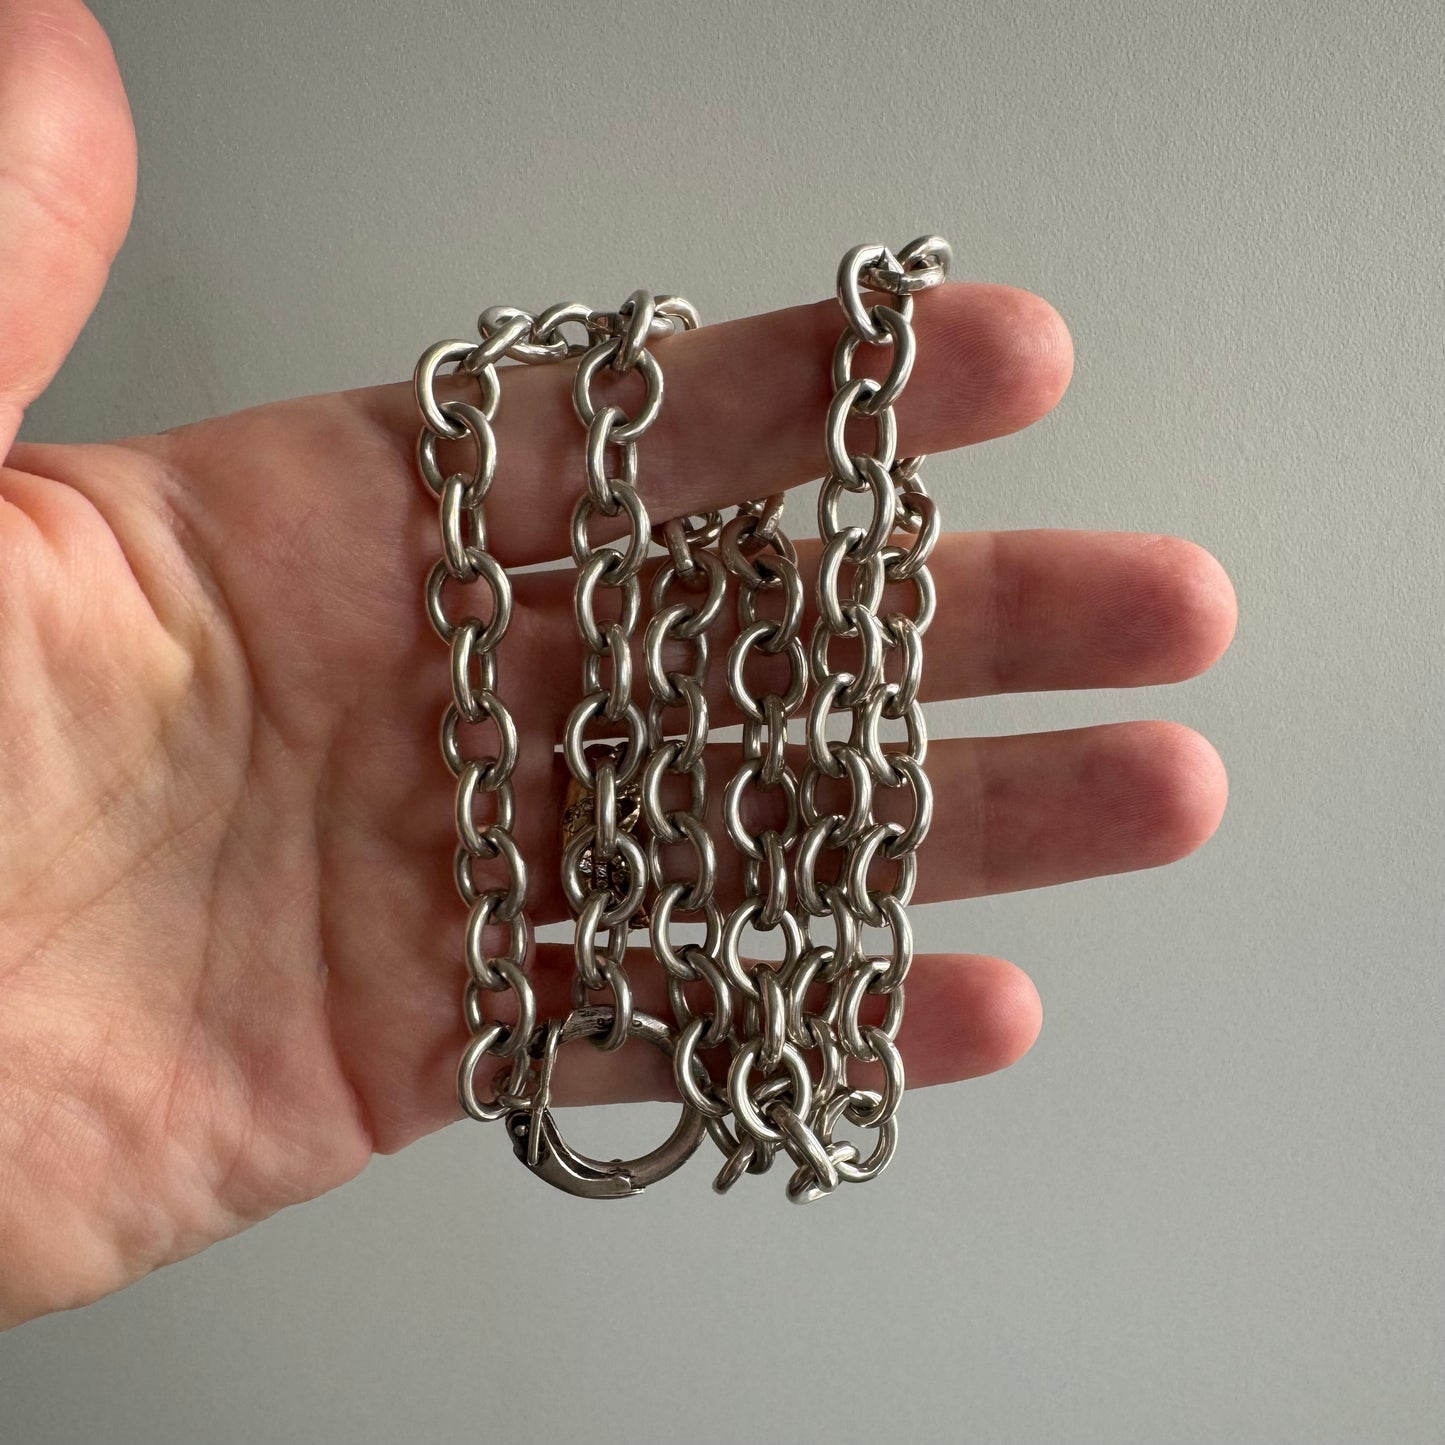 reimagined V I N T A G E // connected possibilities / sterling silver chunky cable chain with connector clasp / 21.5", 53g